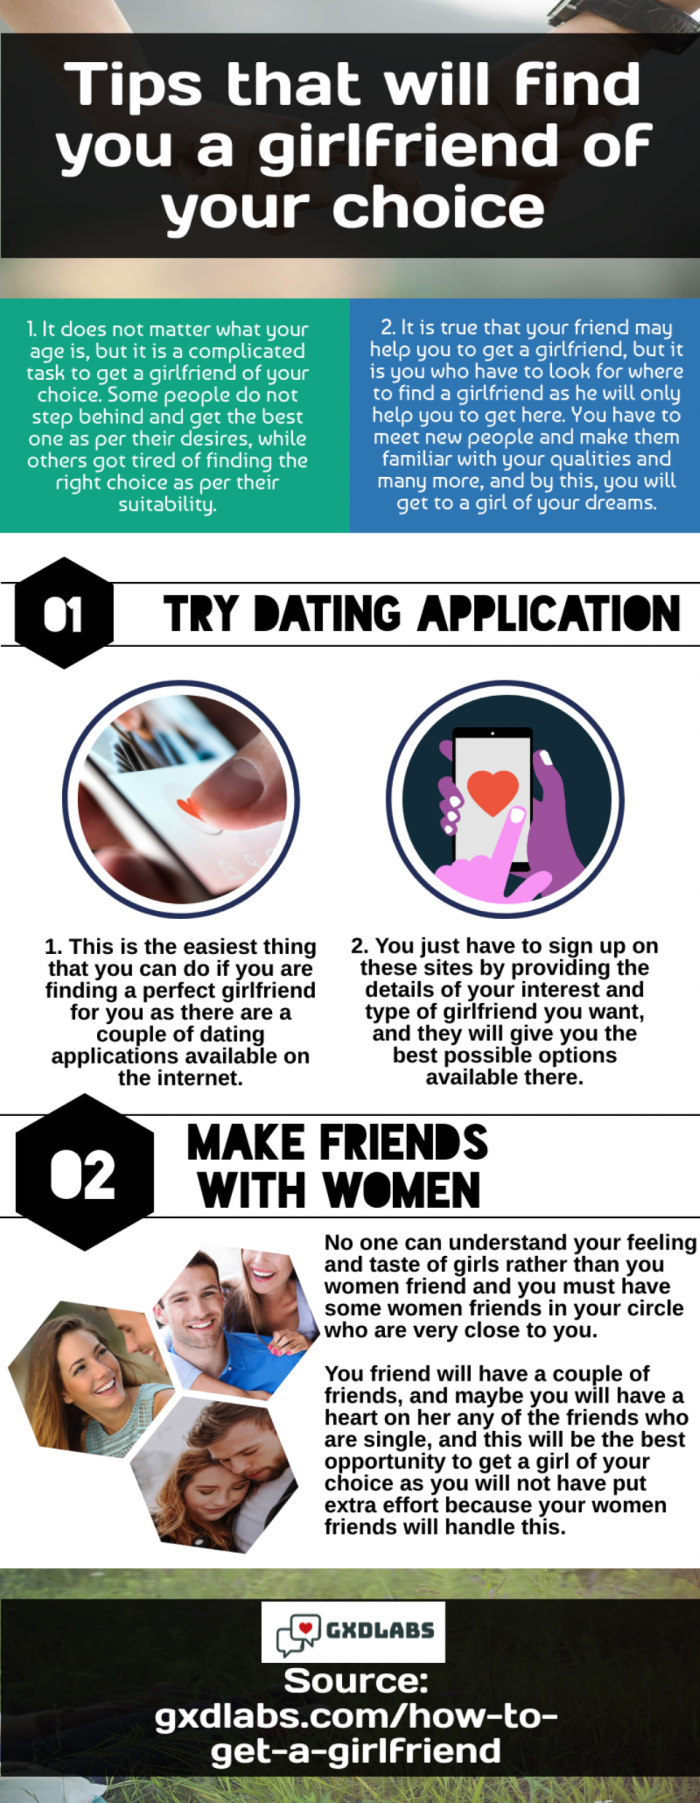 Learn certain tipss to find a girlfriendd